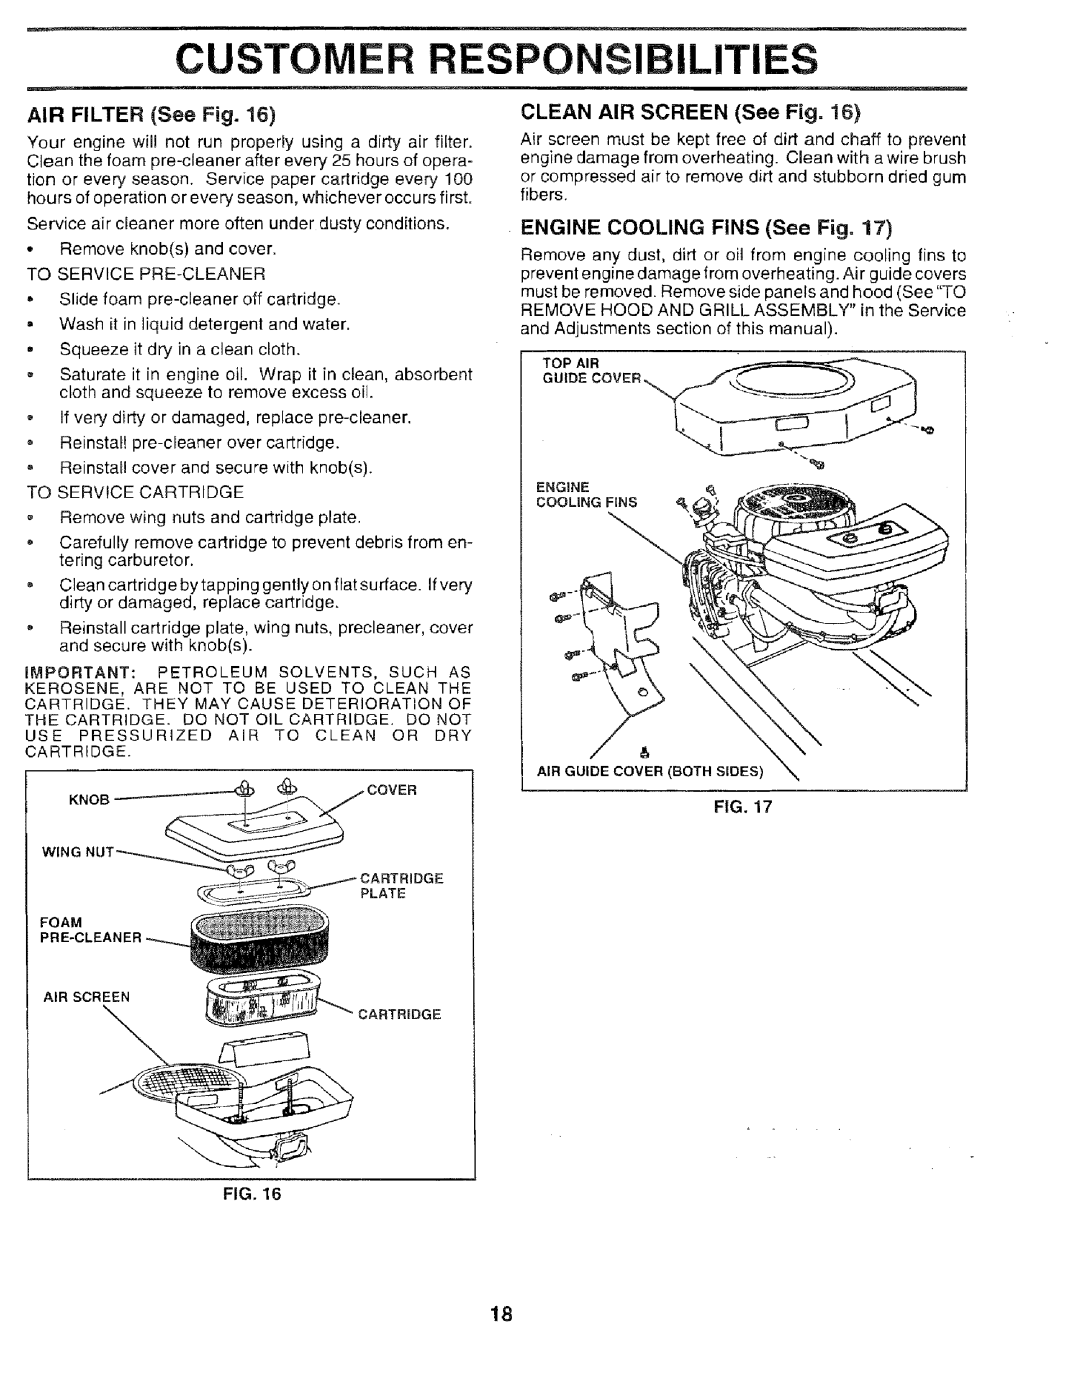 Sears 917.259567 owner manual Ilities, AIR FILTER See Fig, CLEAN AIR SCREEN See Fig, ENGINE COOLING FINS See Fig 